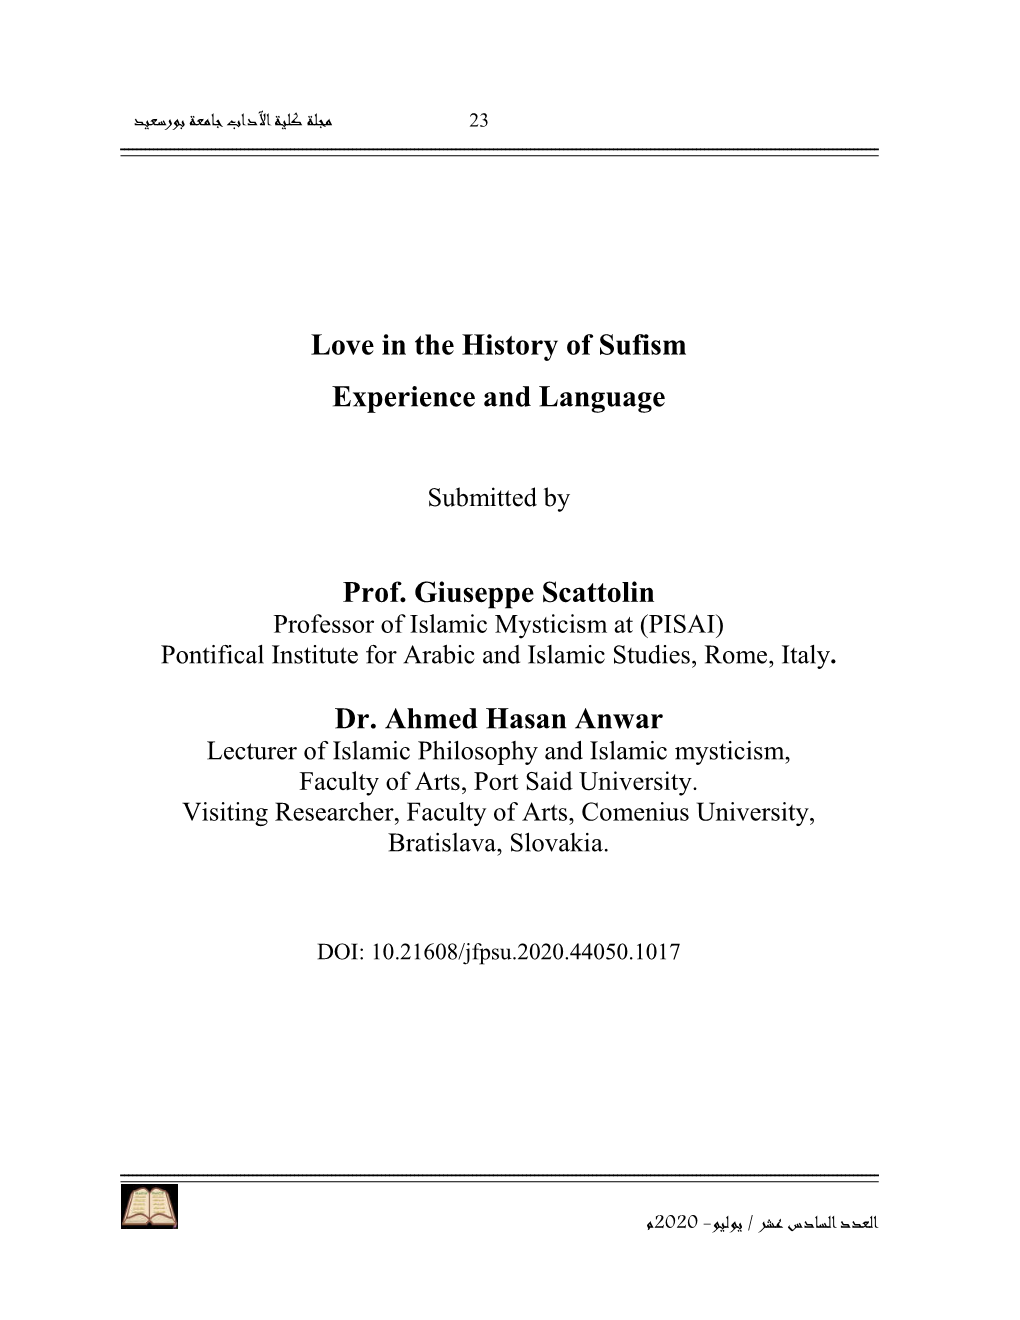 Love in the History of Sufism Experience and Language Prof